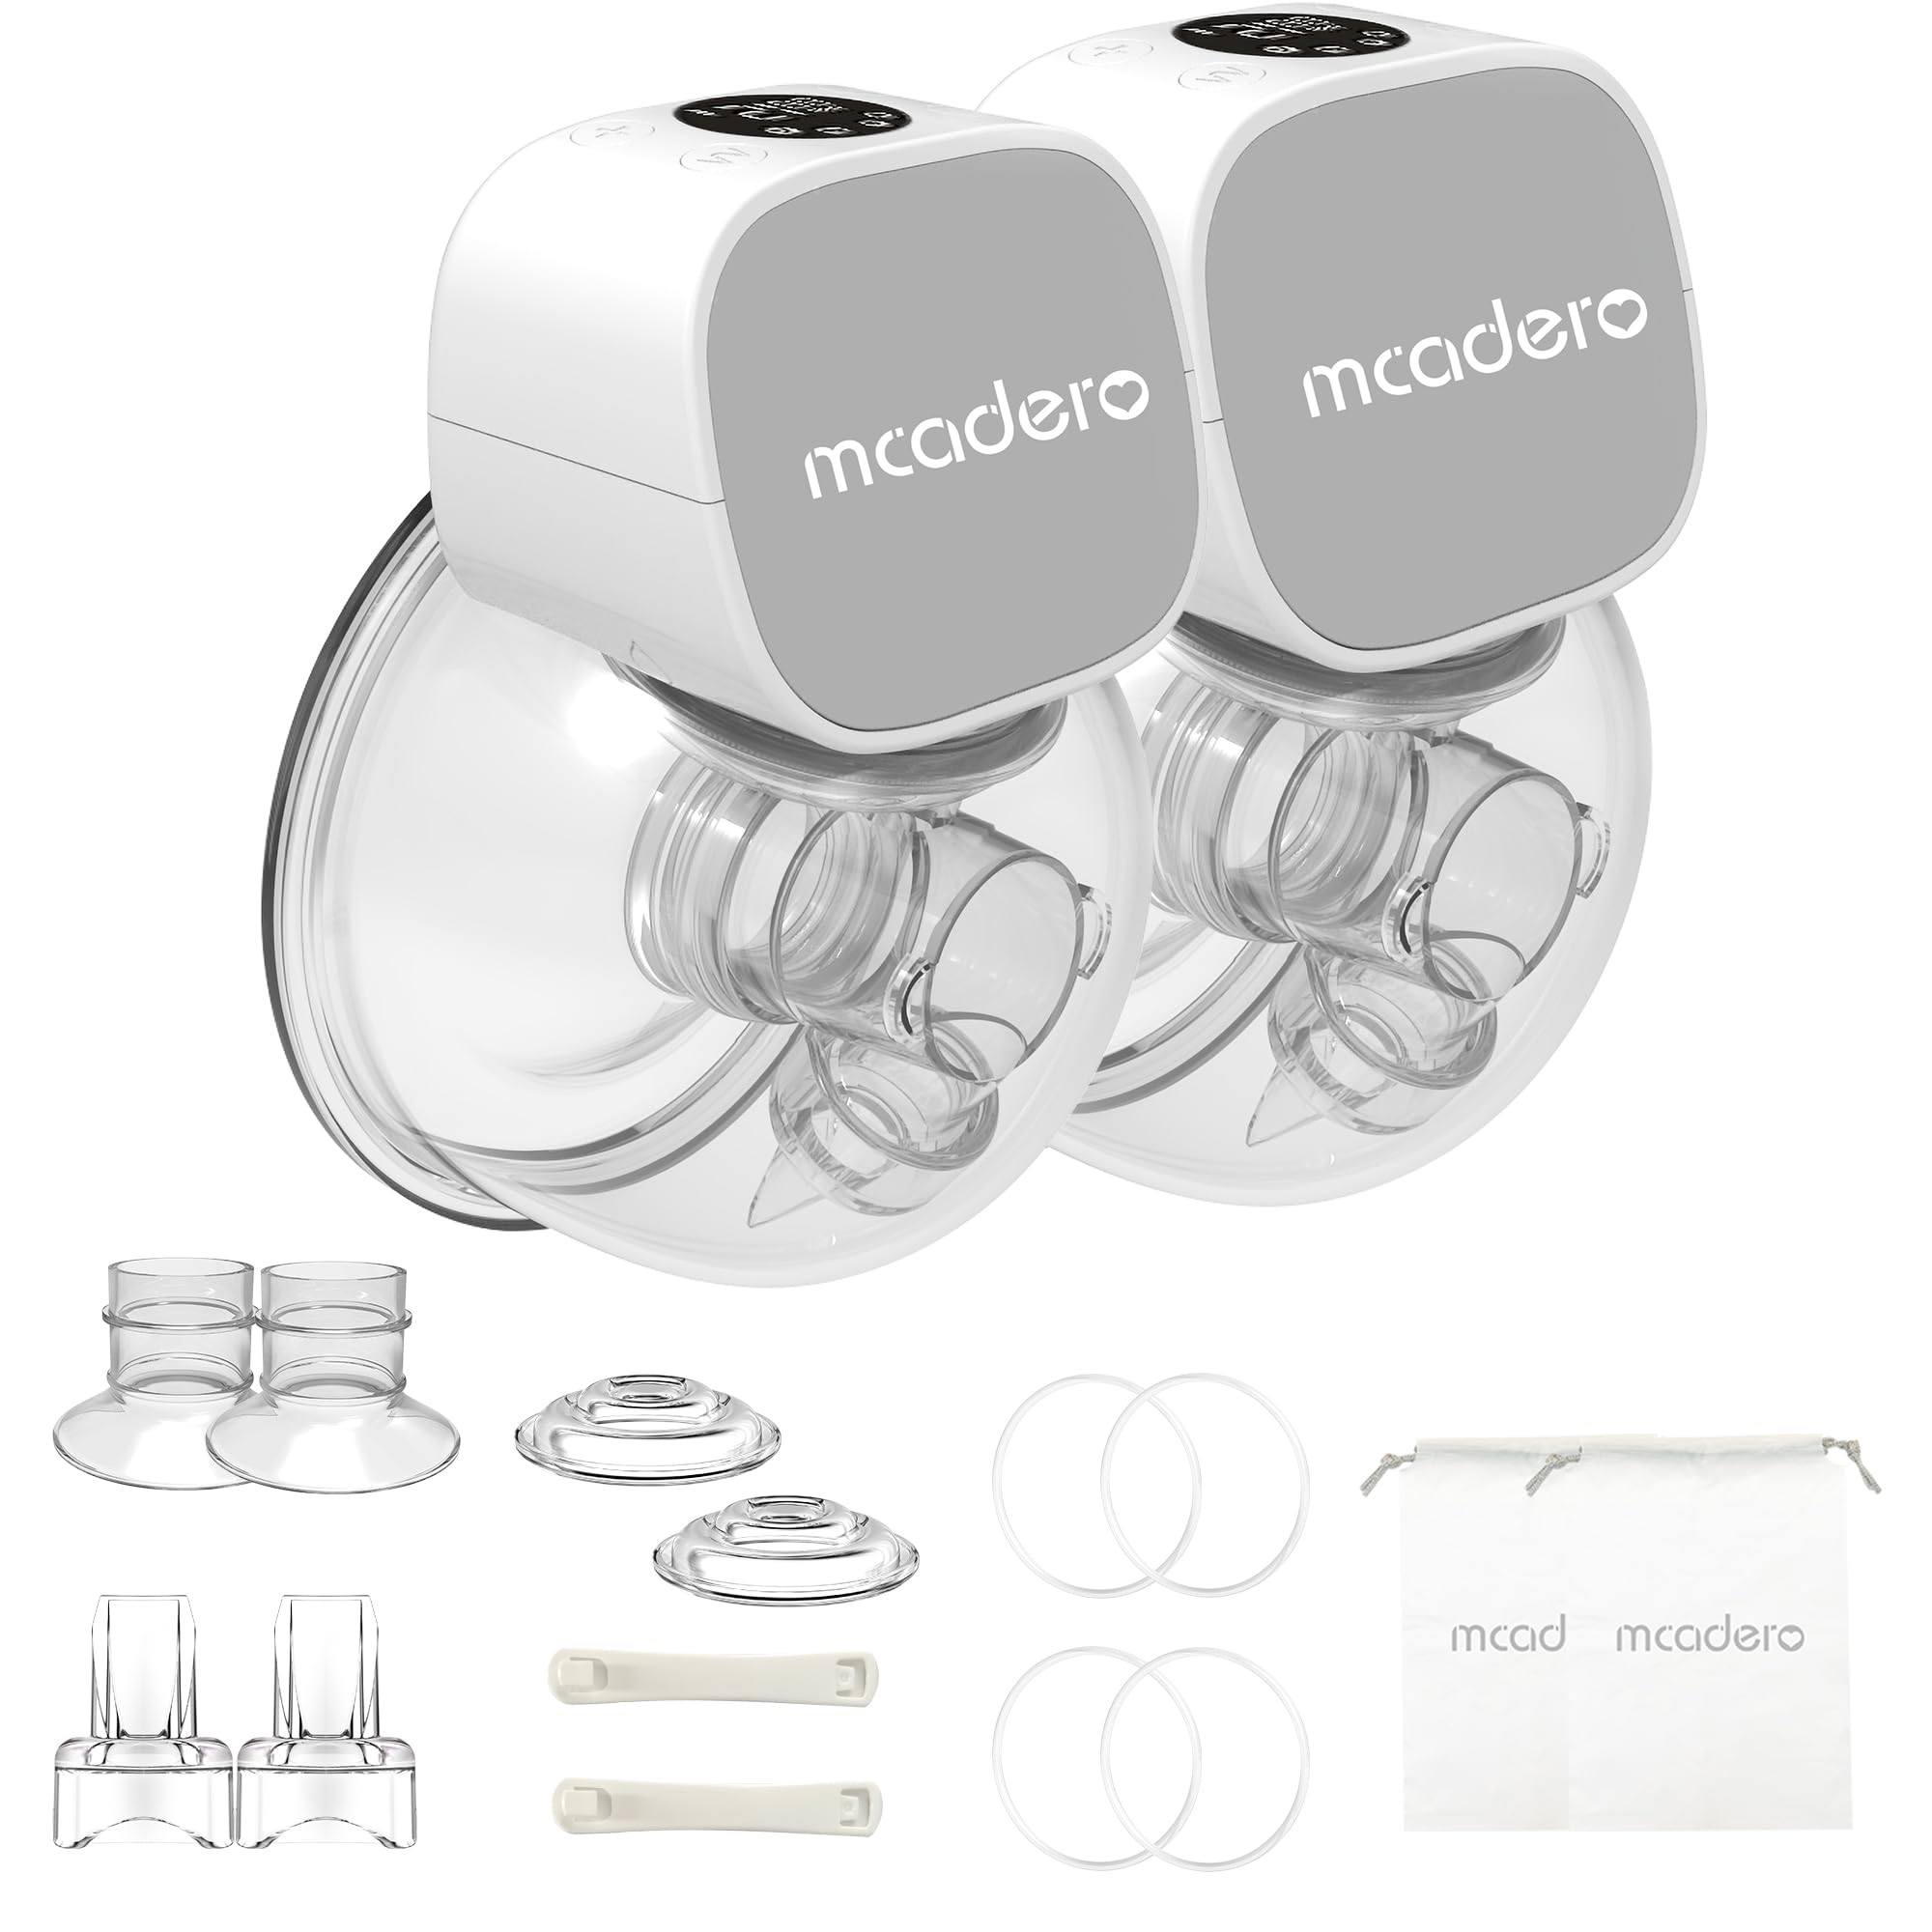 Hands Free Breast Pump, Double Wearable Breast Pump, Portable Electric Breast Pump with 4 Modes & 12 Levels, Mcadero M5-24mm, 2 Pcs Gray